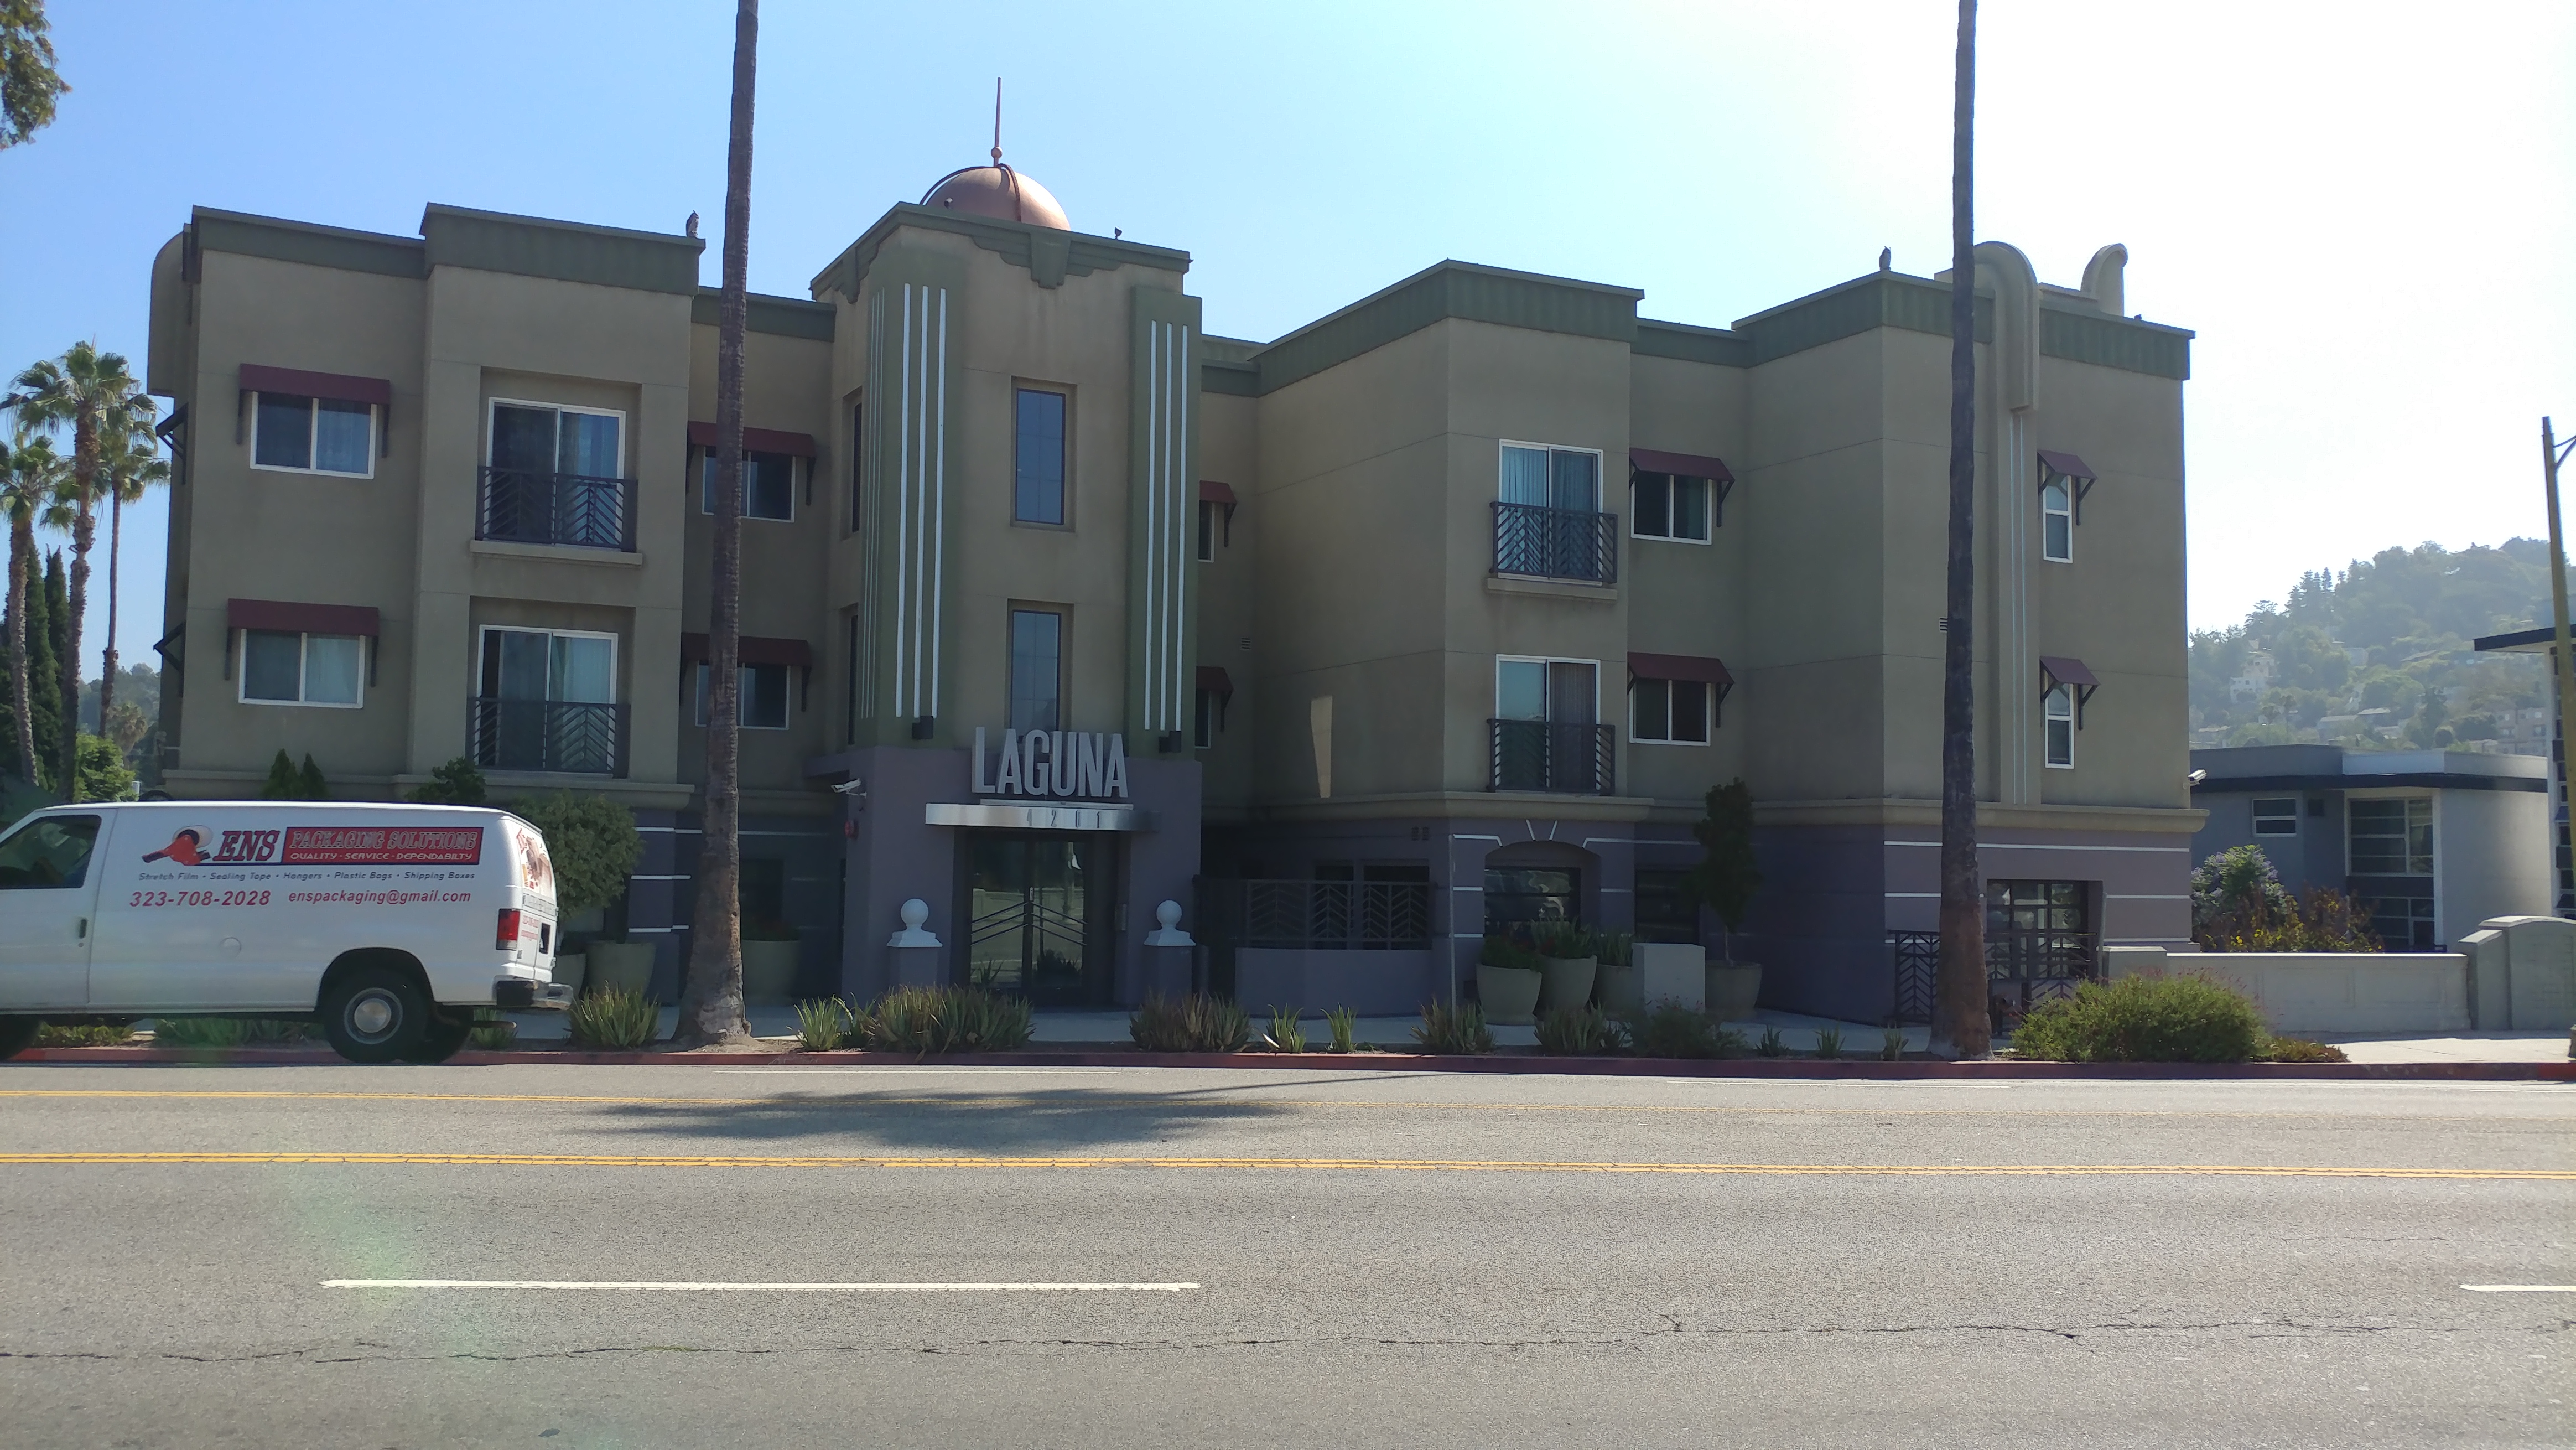 Front view of Laguna three story building, white van parked outside, multiple windows, sliding doors with guard rails on the second and third floor, big beige planters, tall palm trees.